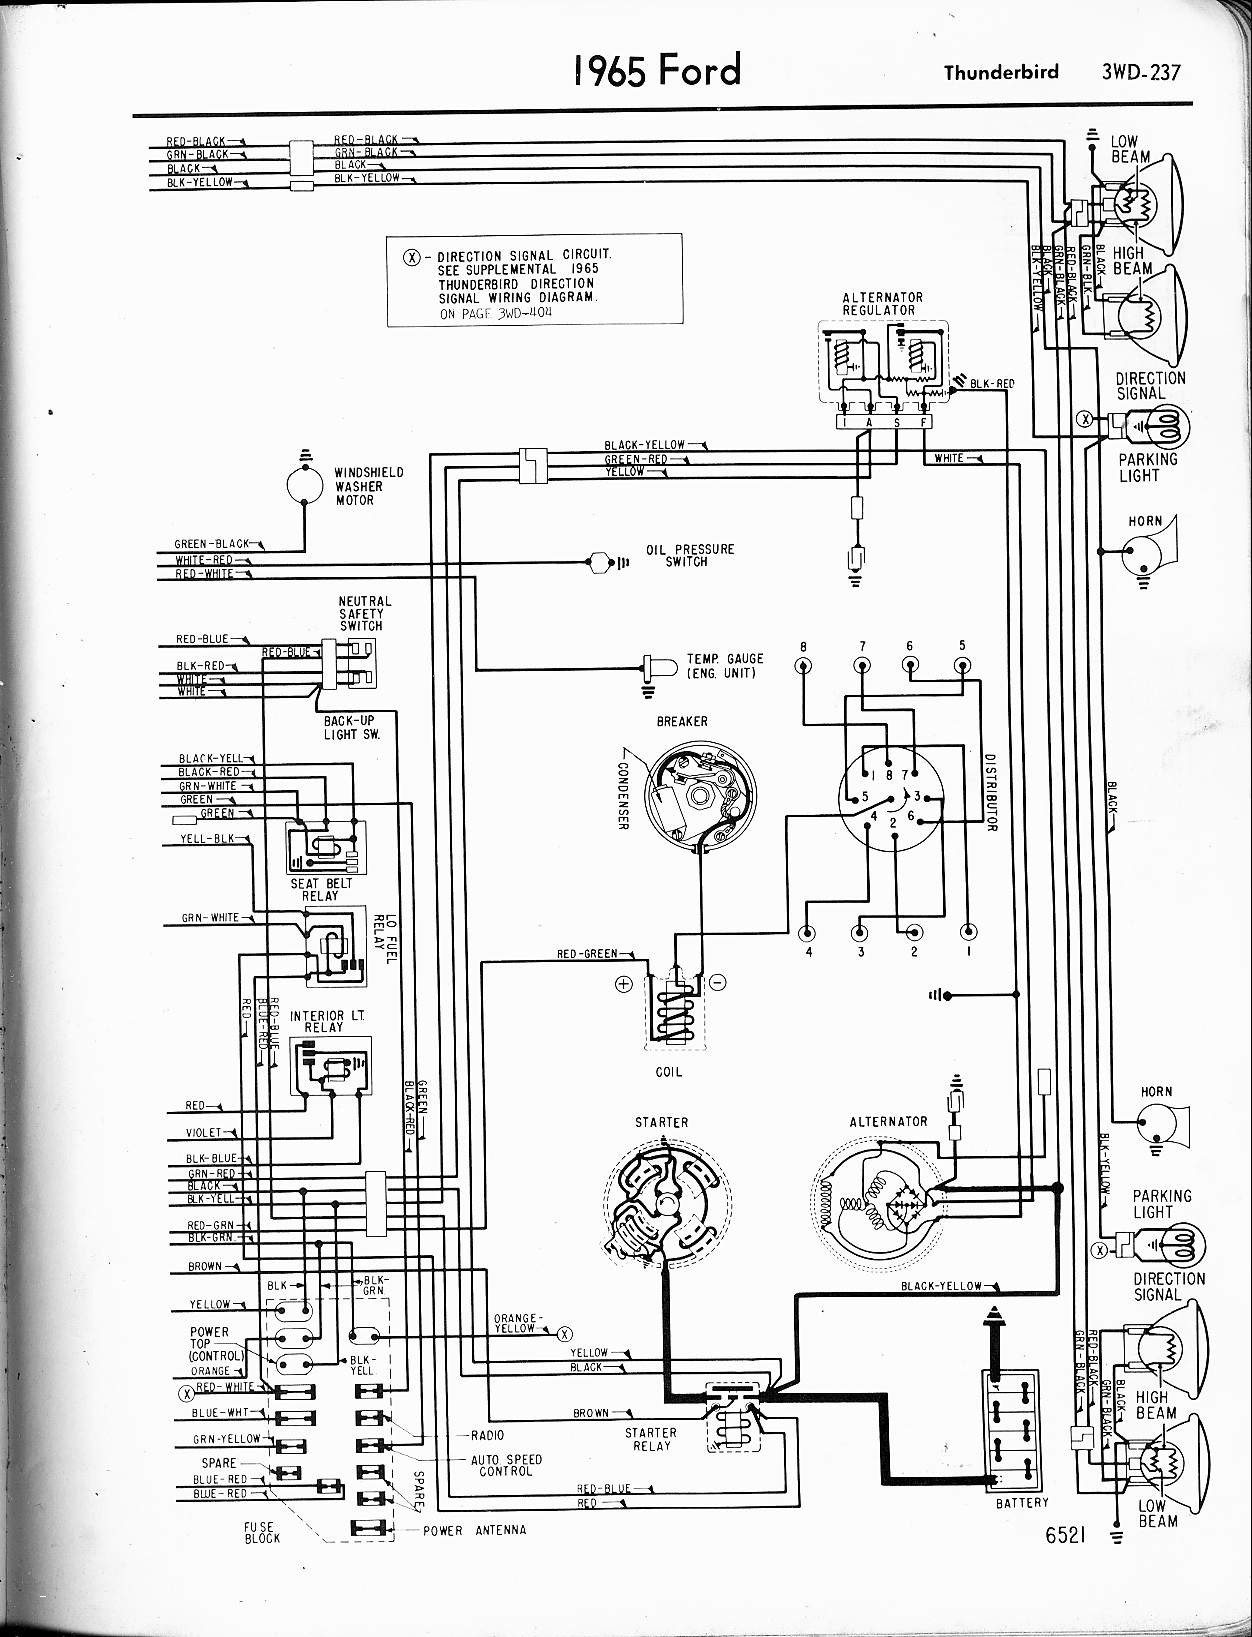 1965 Mustang Wiring Diagram Unique ford Parts Wiring Wiring Diagram